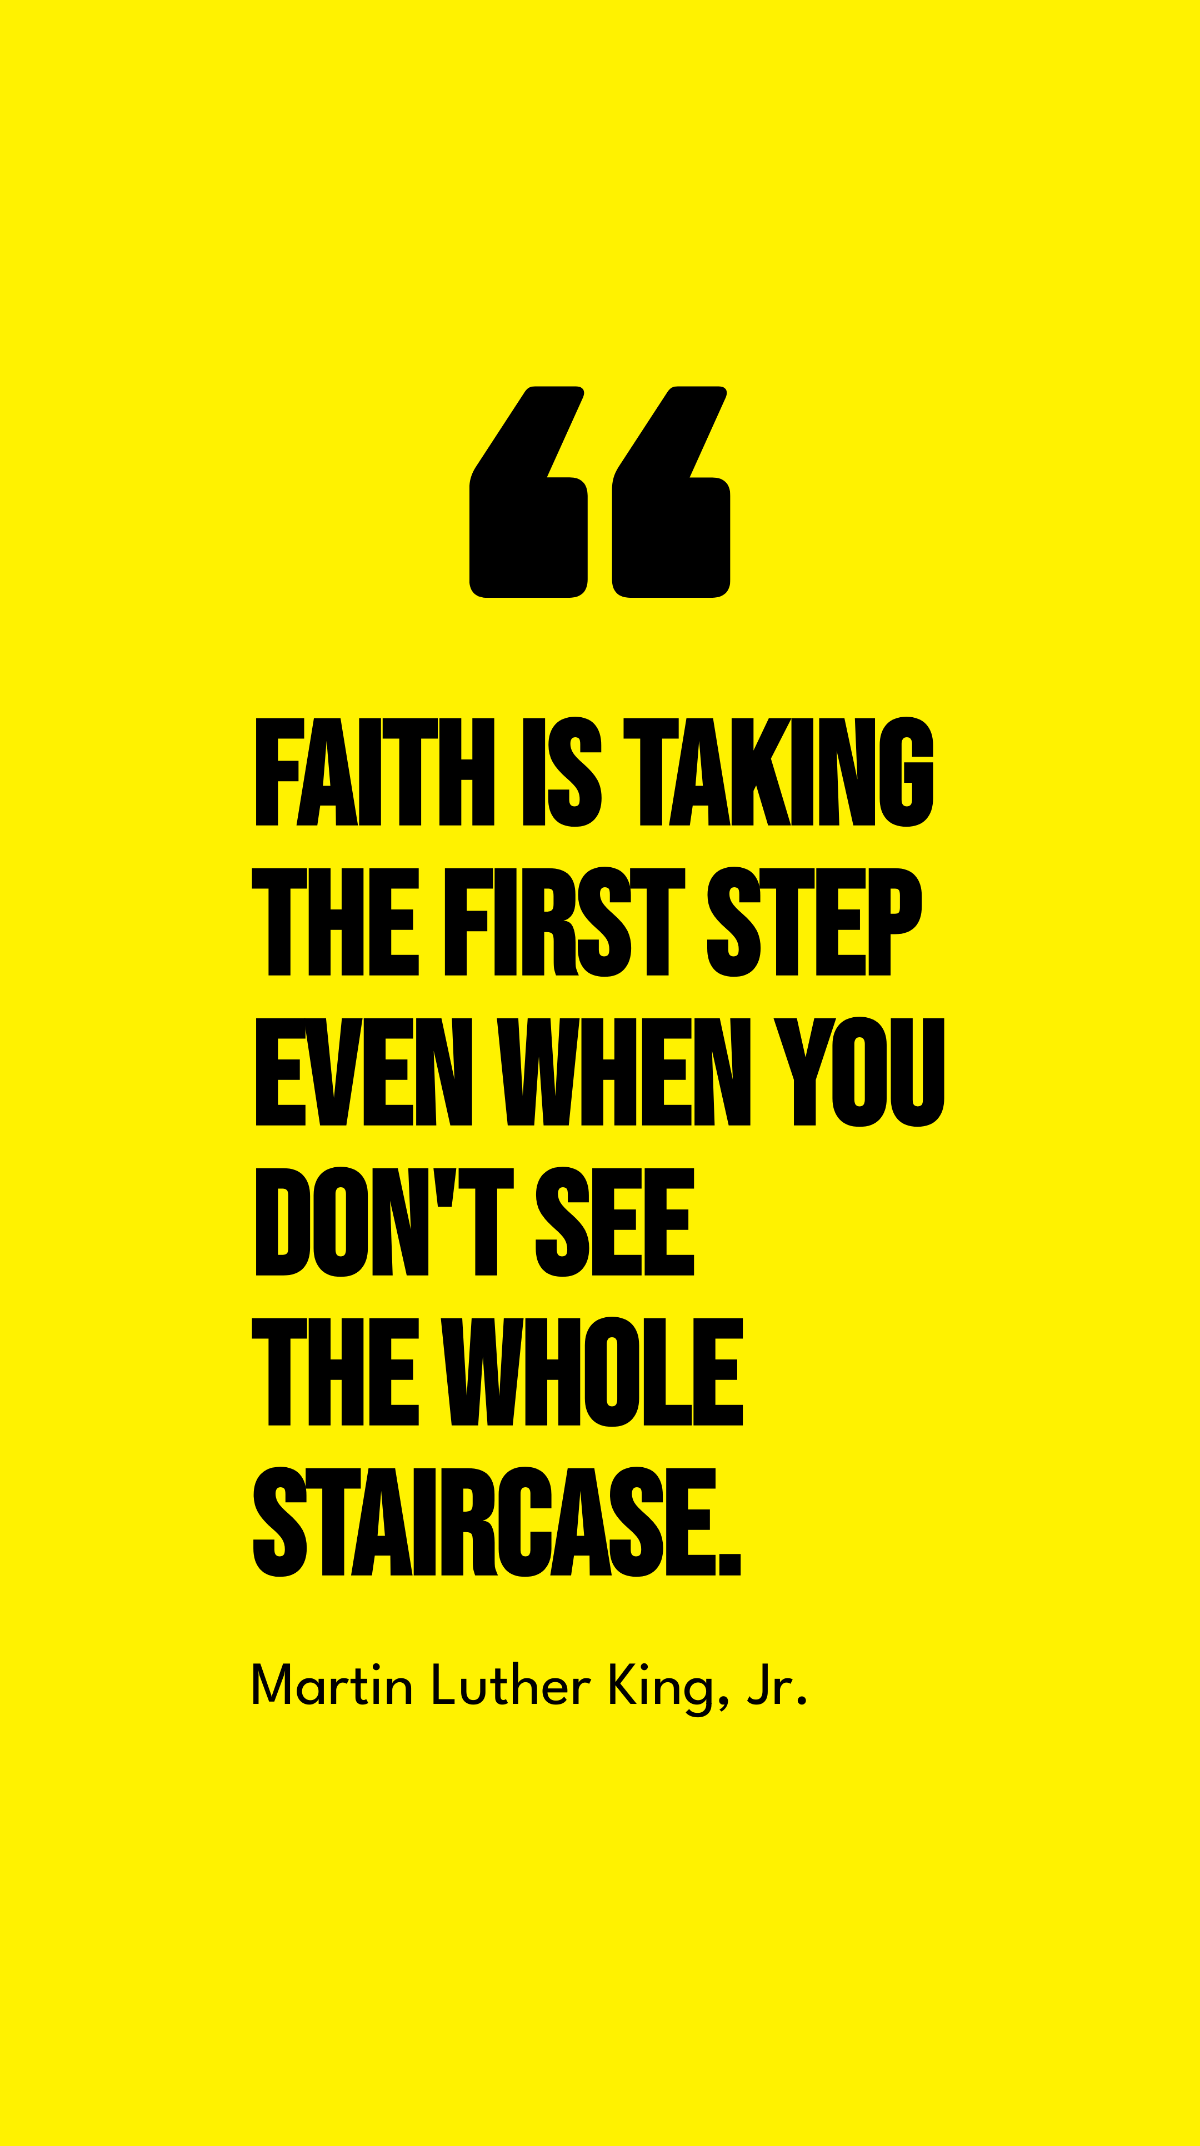 Free Martin Luther King, Jr. - Faith is taking the first step even when you don't see the whole staircase. Template